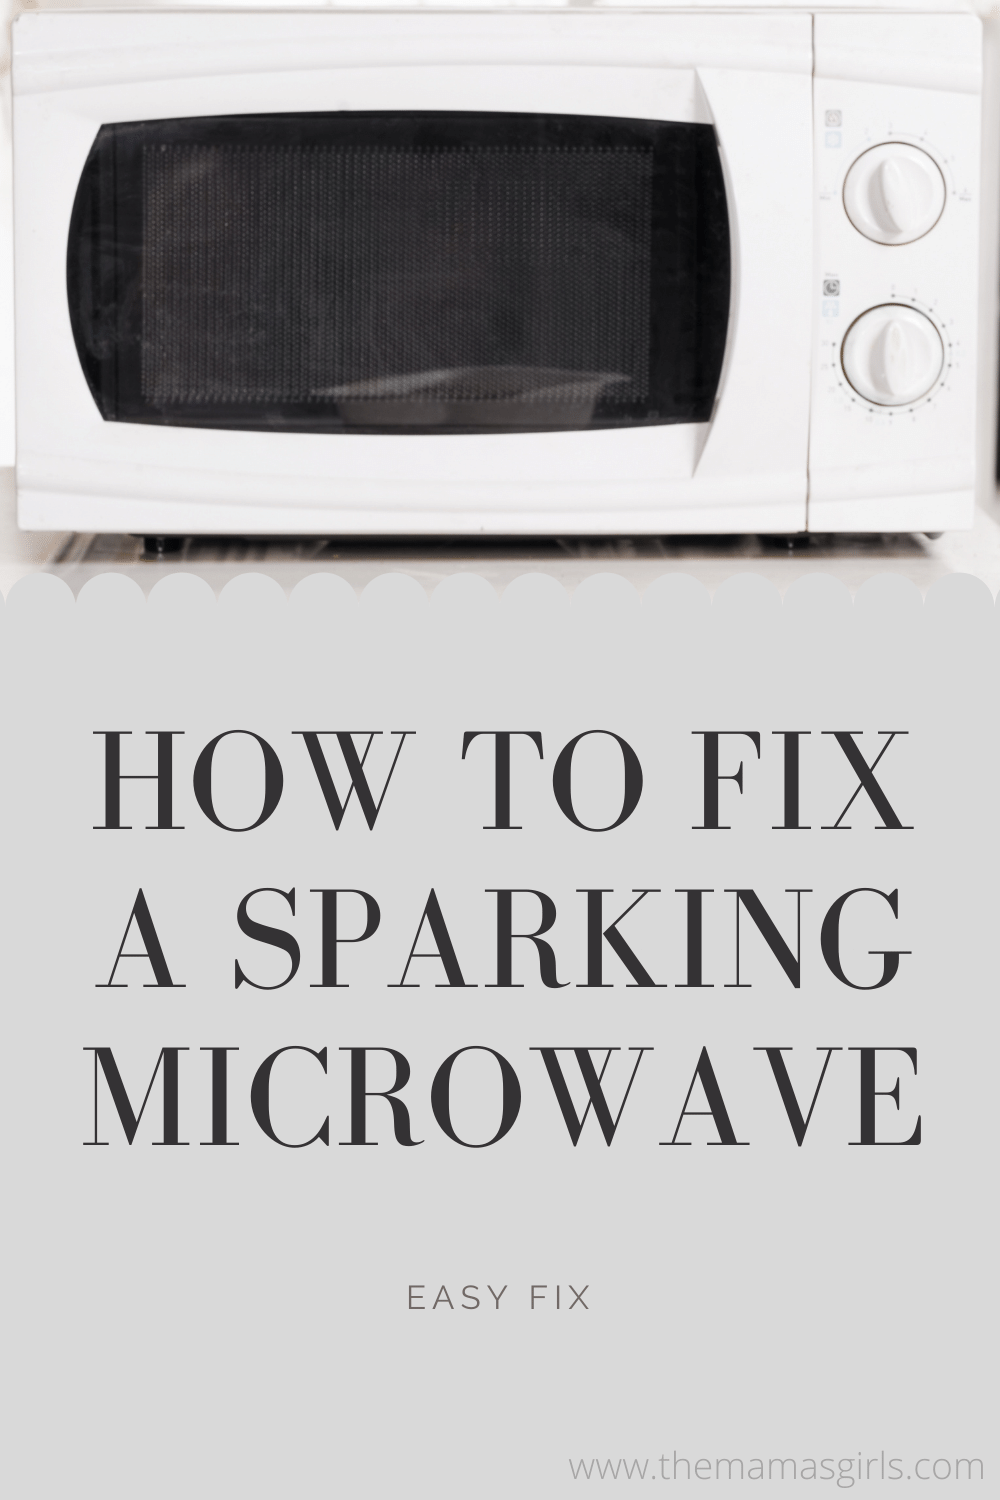 Microwave Sparking: Problem and Resolution